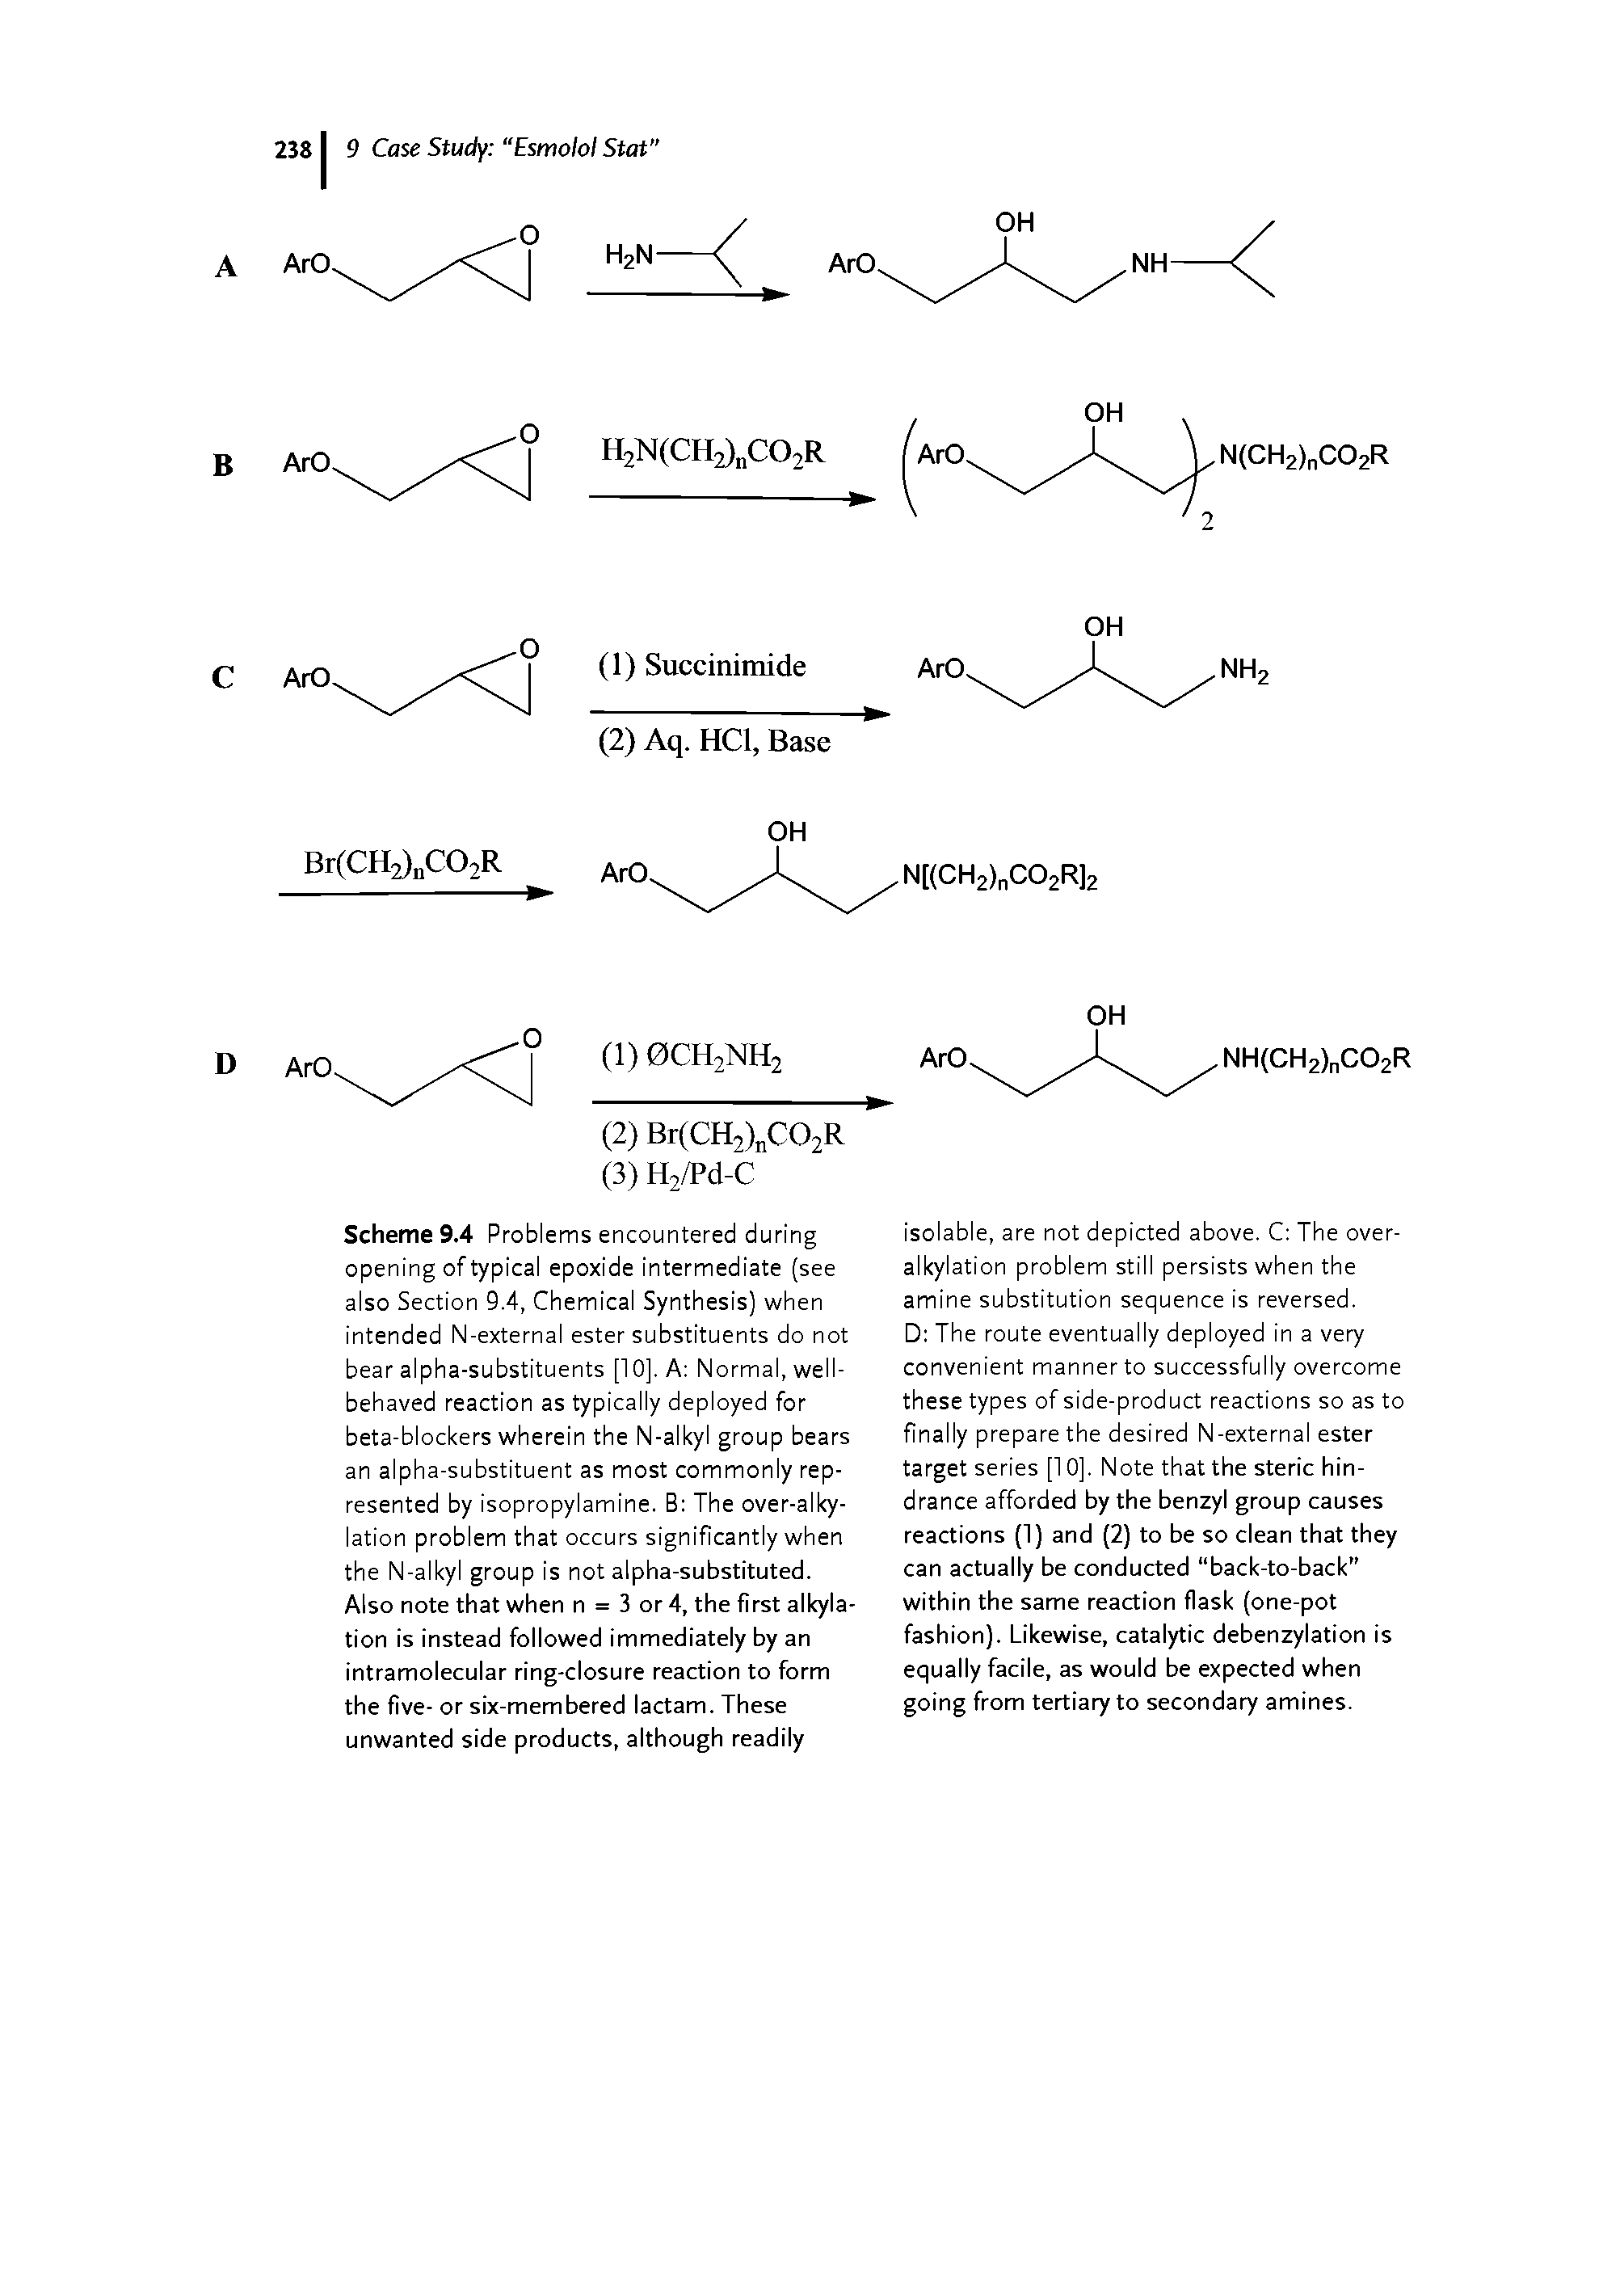 Scheme 9.4 Problems encountered during opening of typical epoxide intermediate (see also Section 9.4, Chemical Synthesis) when intended N-external ester substituents do not bear alpha-substituents [10]. A Normal, well-behaved reaction as typically deployed for beta-blockers wherein the N-alkyl group bears an alpha-substituent as most commonly represented by isopropylamine. B The over-alky-lation problem that occurs significantly when the N-alkyl group is not alpha-substituted. Also note that when n = 3 or 4, the first alkylation is instead followed immediately by an intramolecular ring-closure reaction to form the five- or six-membered lactam. These unwanted side products, although readily...